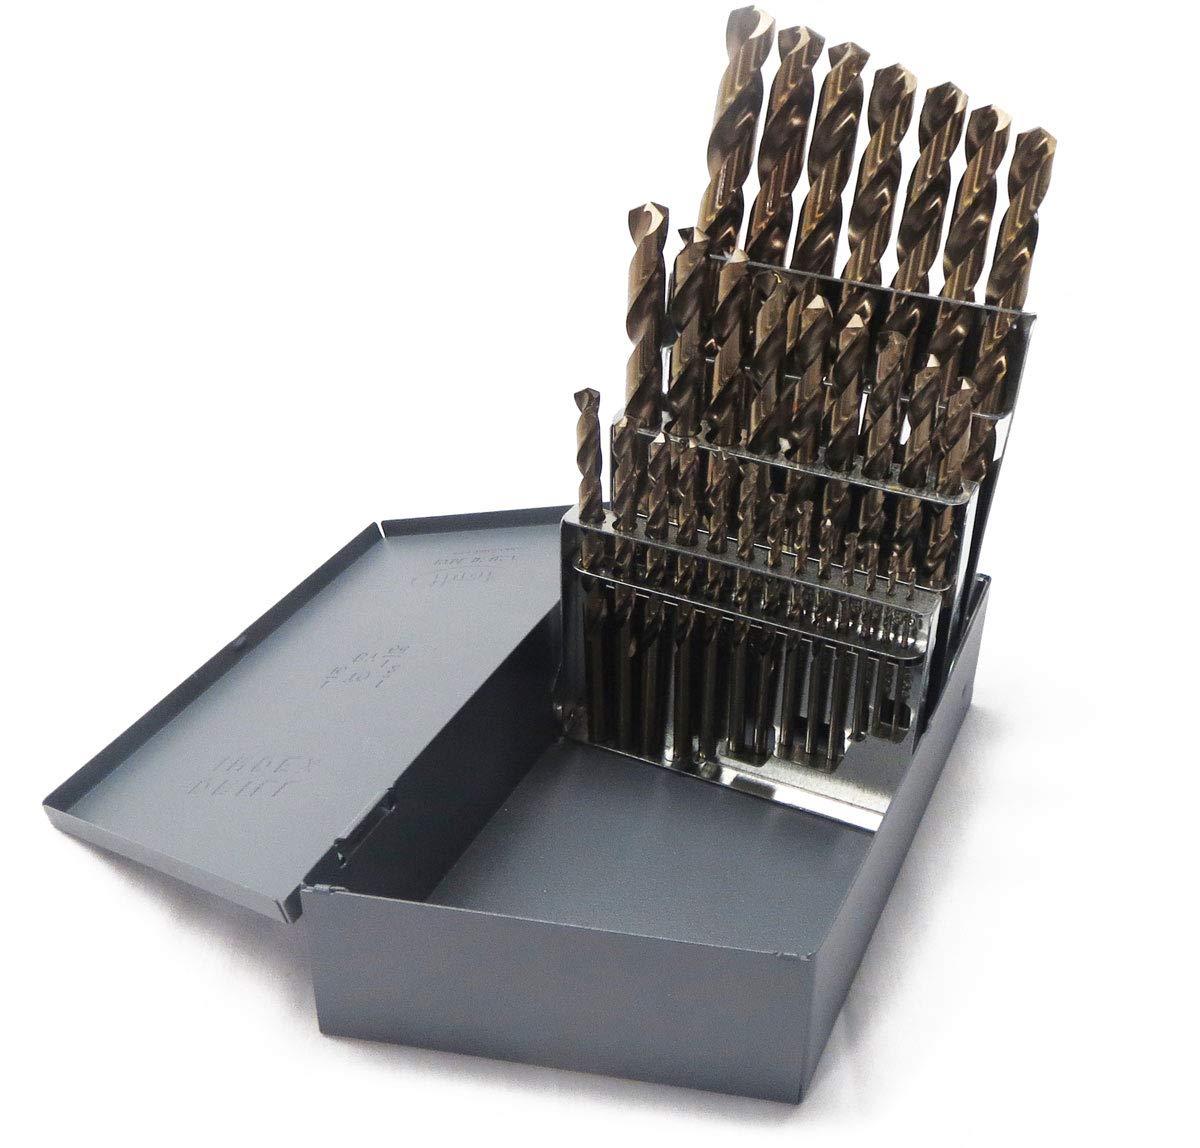 29 Pc. COBALT DRILL BIT SET FRACTIONAL 1/16" TO 1/2" BY 64THS 1